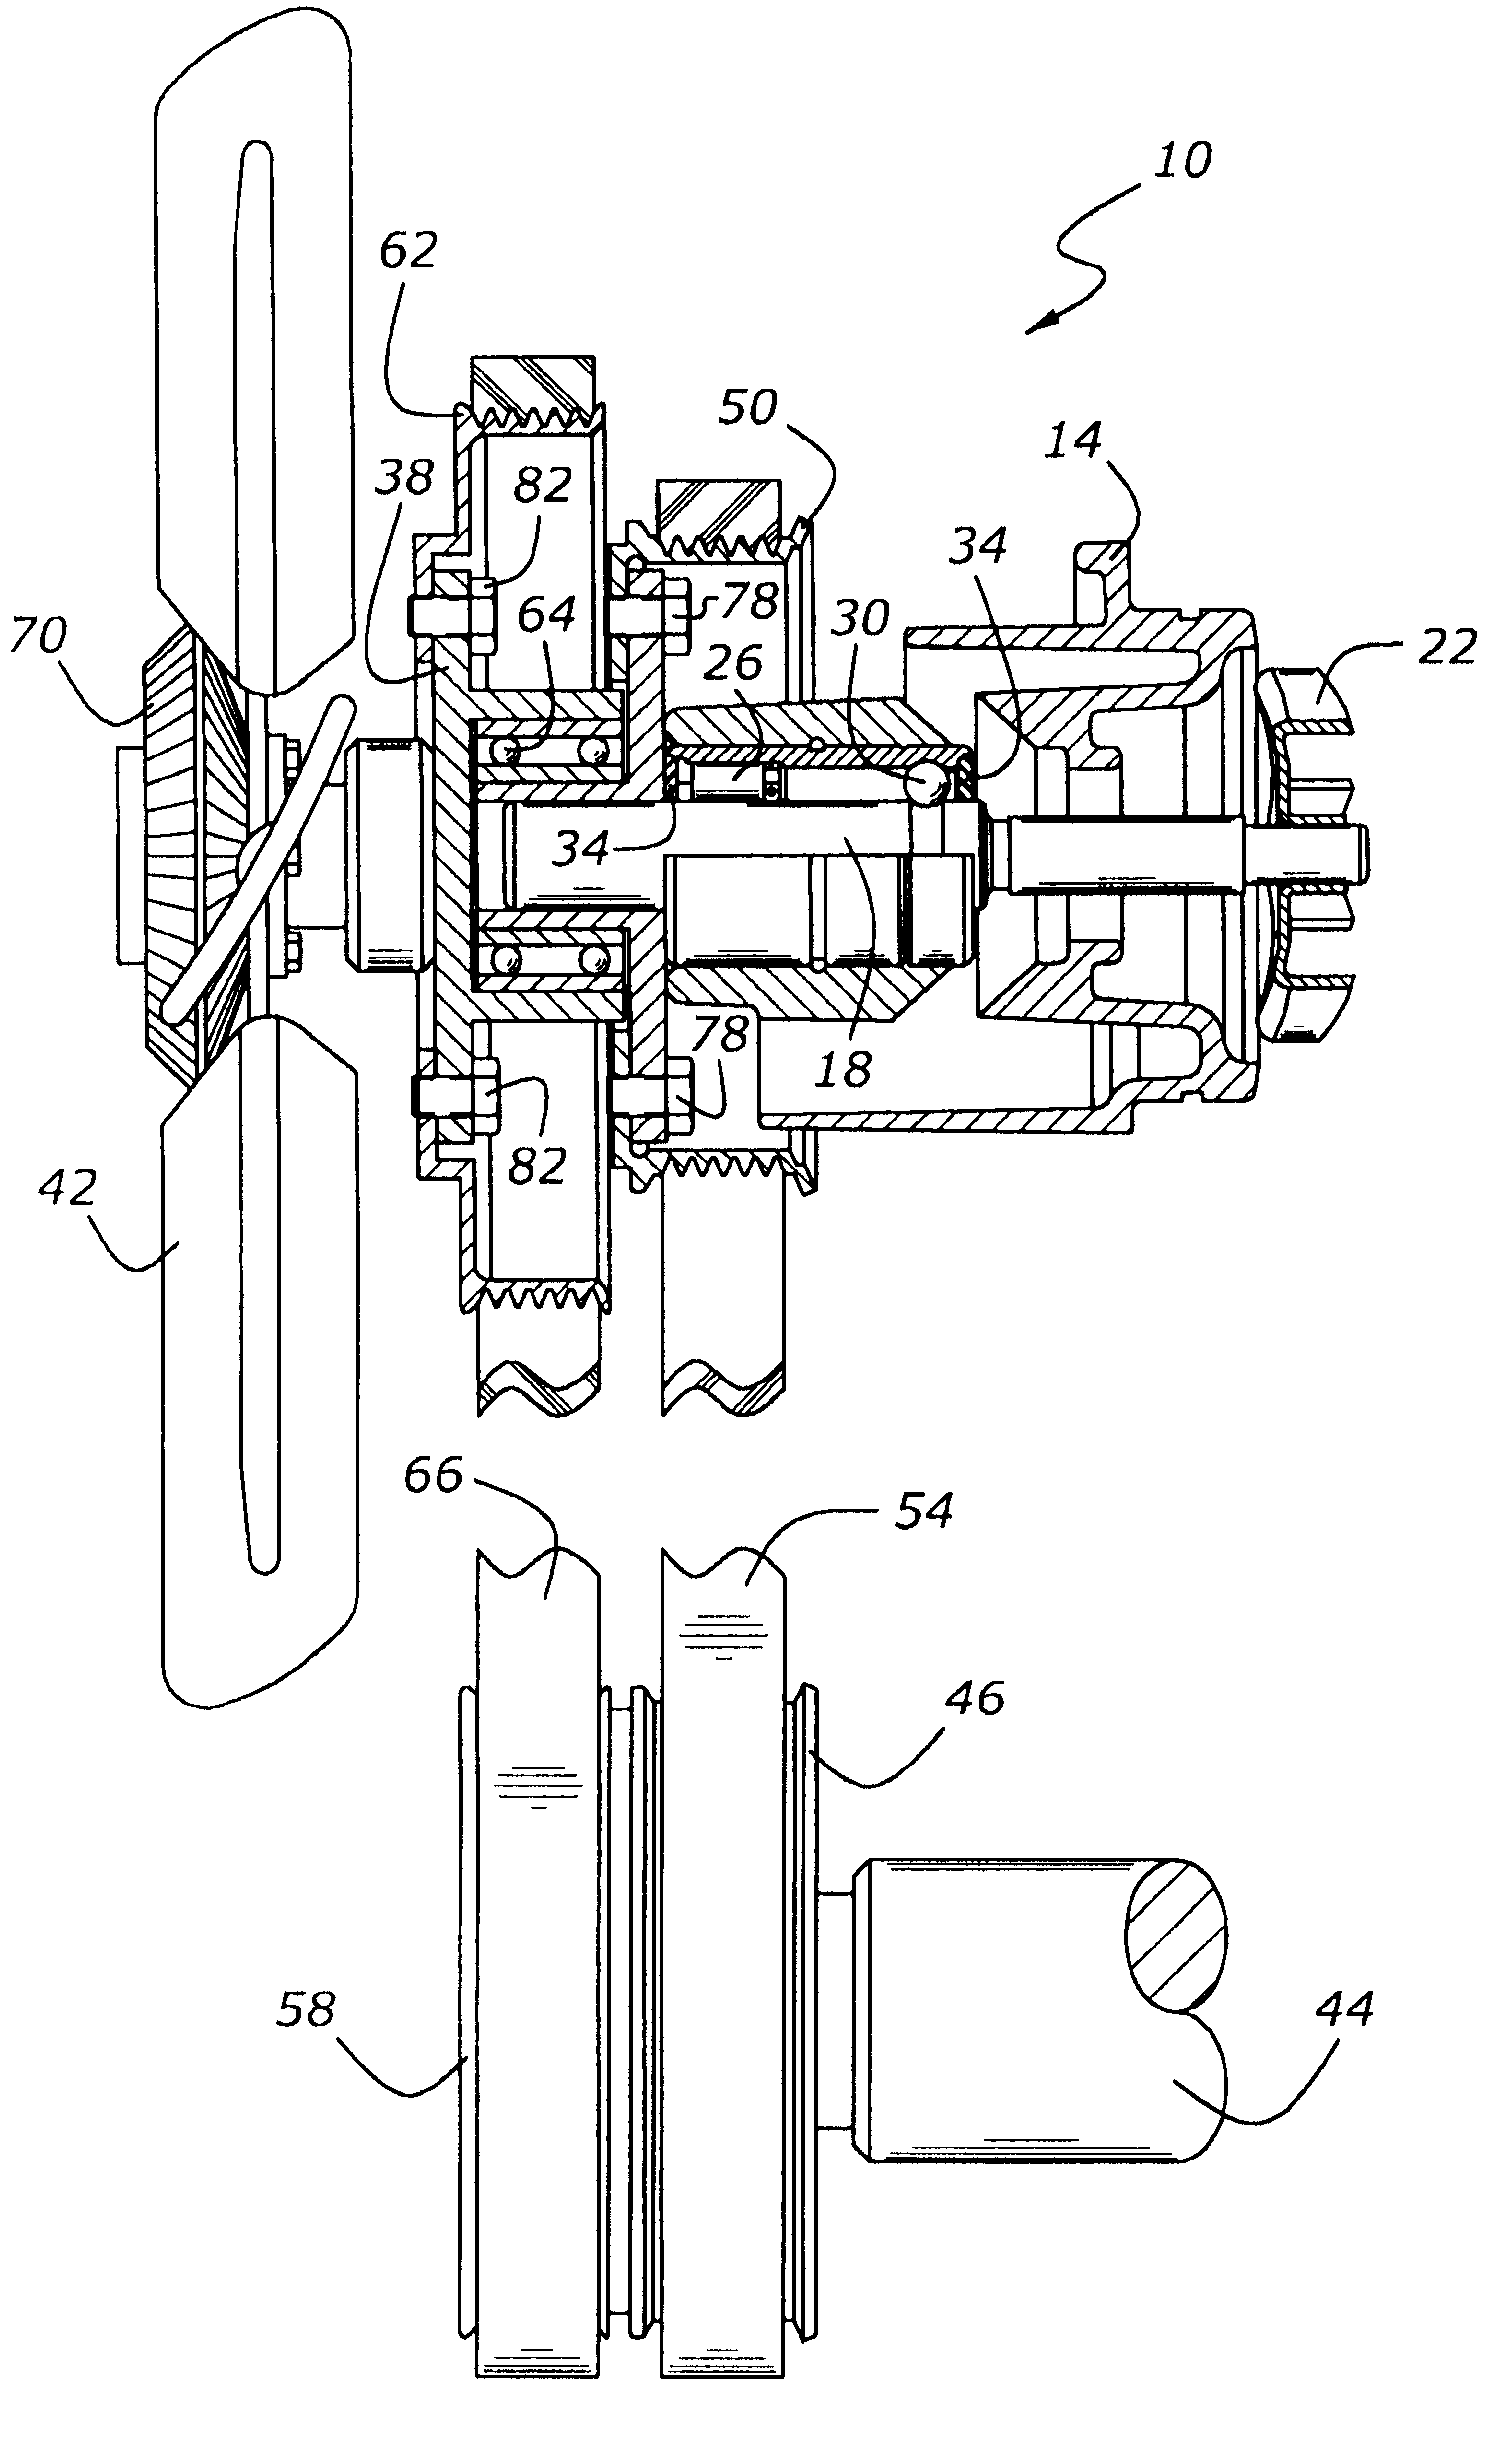 Dual drive radiator fan and coolant pump system for internal combustion engine